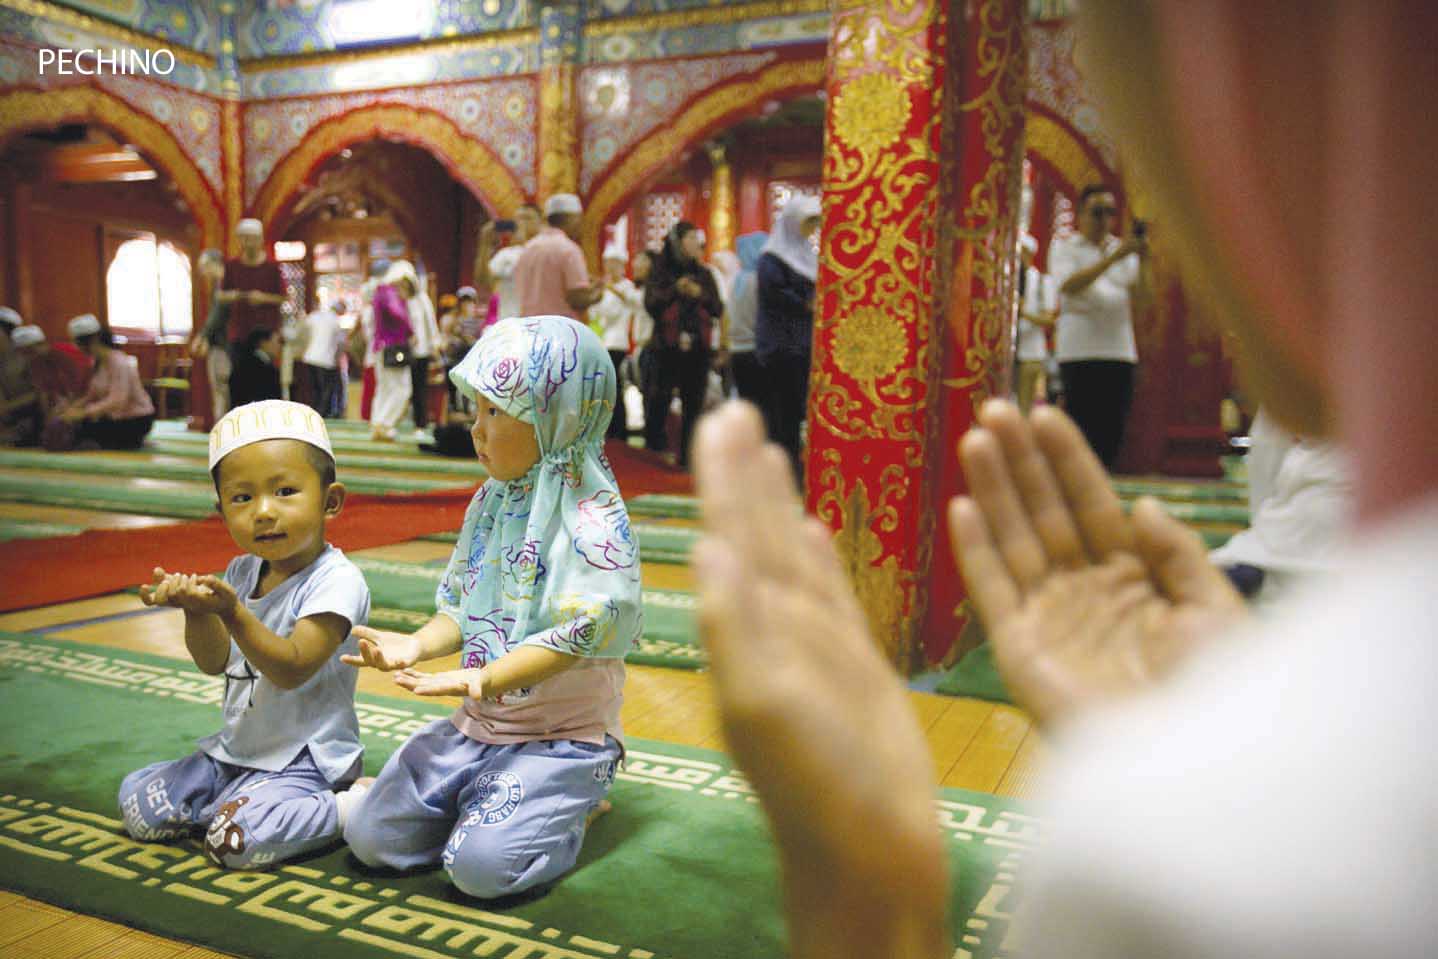 Beijing : Children kneel inside the historic Niujie Mosque after Eid al-Fitr prayer services in Beijing, Monday, June 26, 2017. Although much of the Muslim world celebrated Eid al-Fitr, which marks the end of the holy fasting month of Ramadan, on Sunday, Muslims in China observed the holiday on Monday. AP/PTI(AP6_26_2017_000068B)